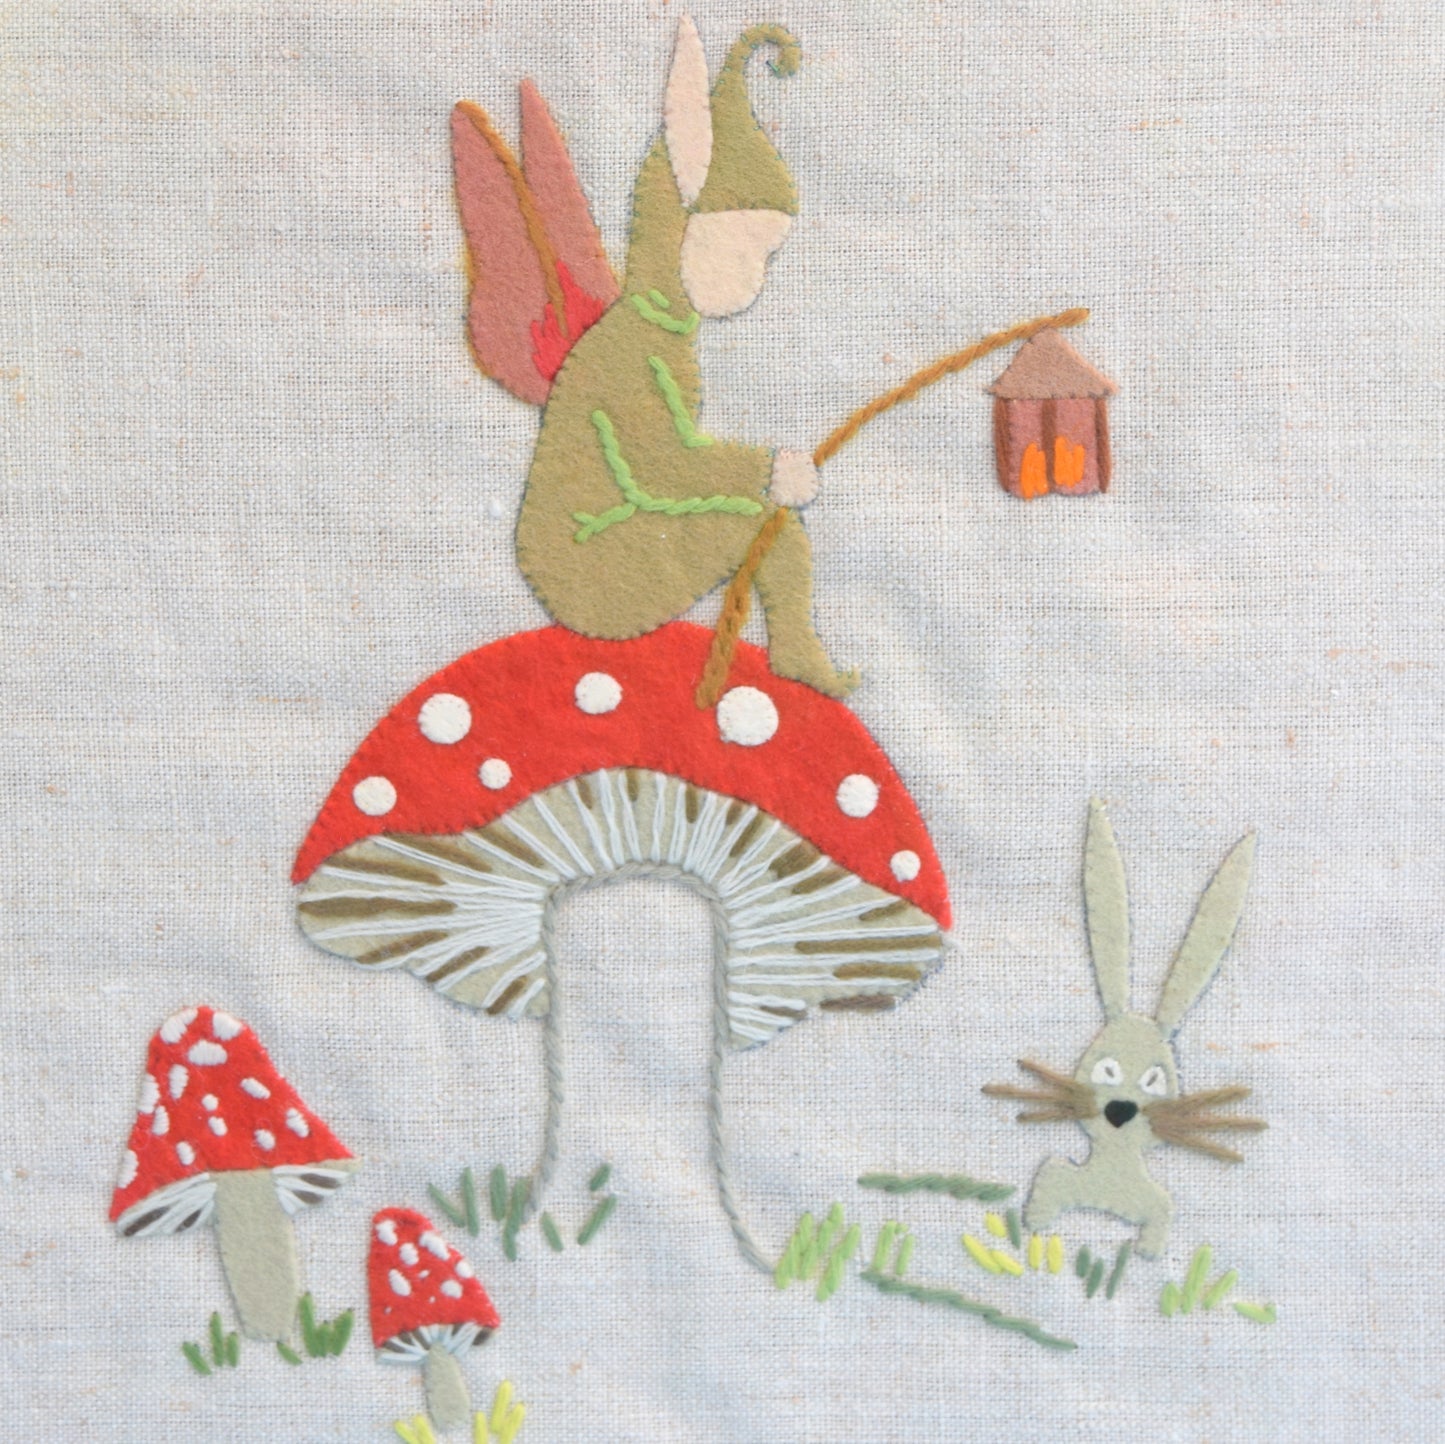 Vintage 1950s Embroidered Felt Picture - Toadstool & Pixie